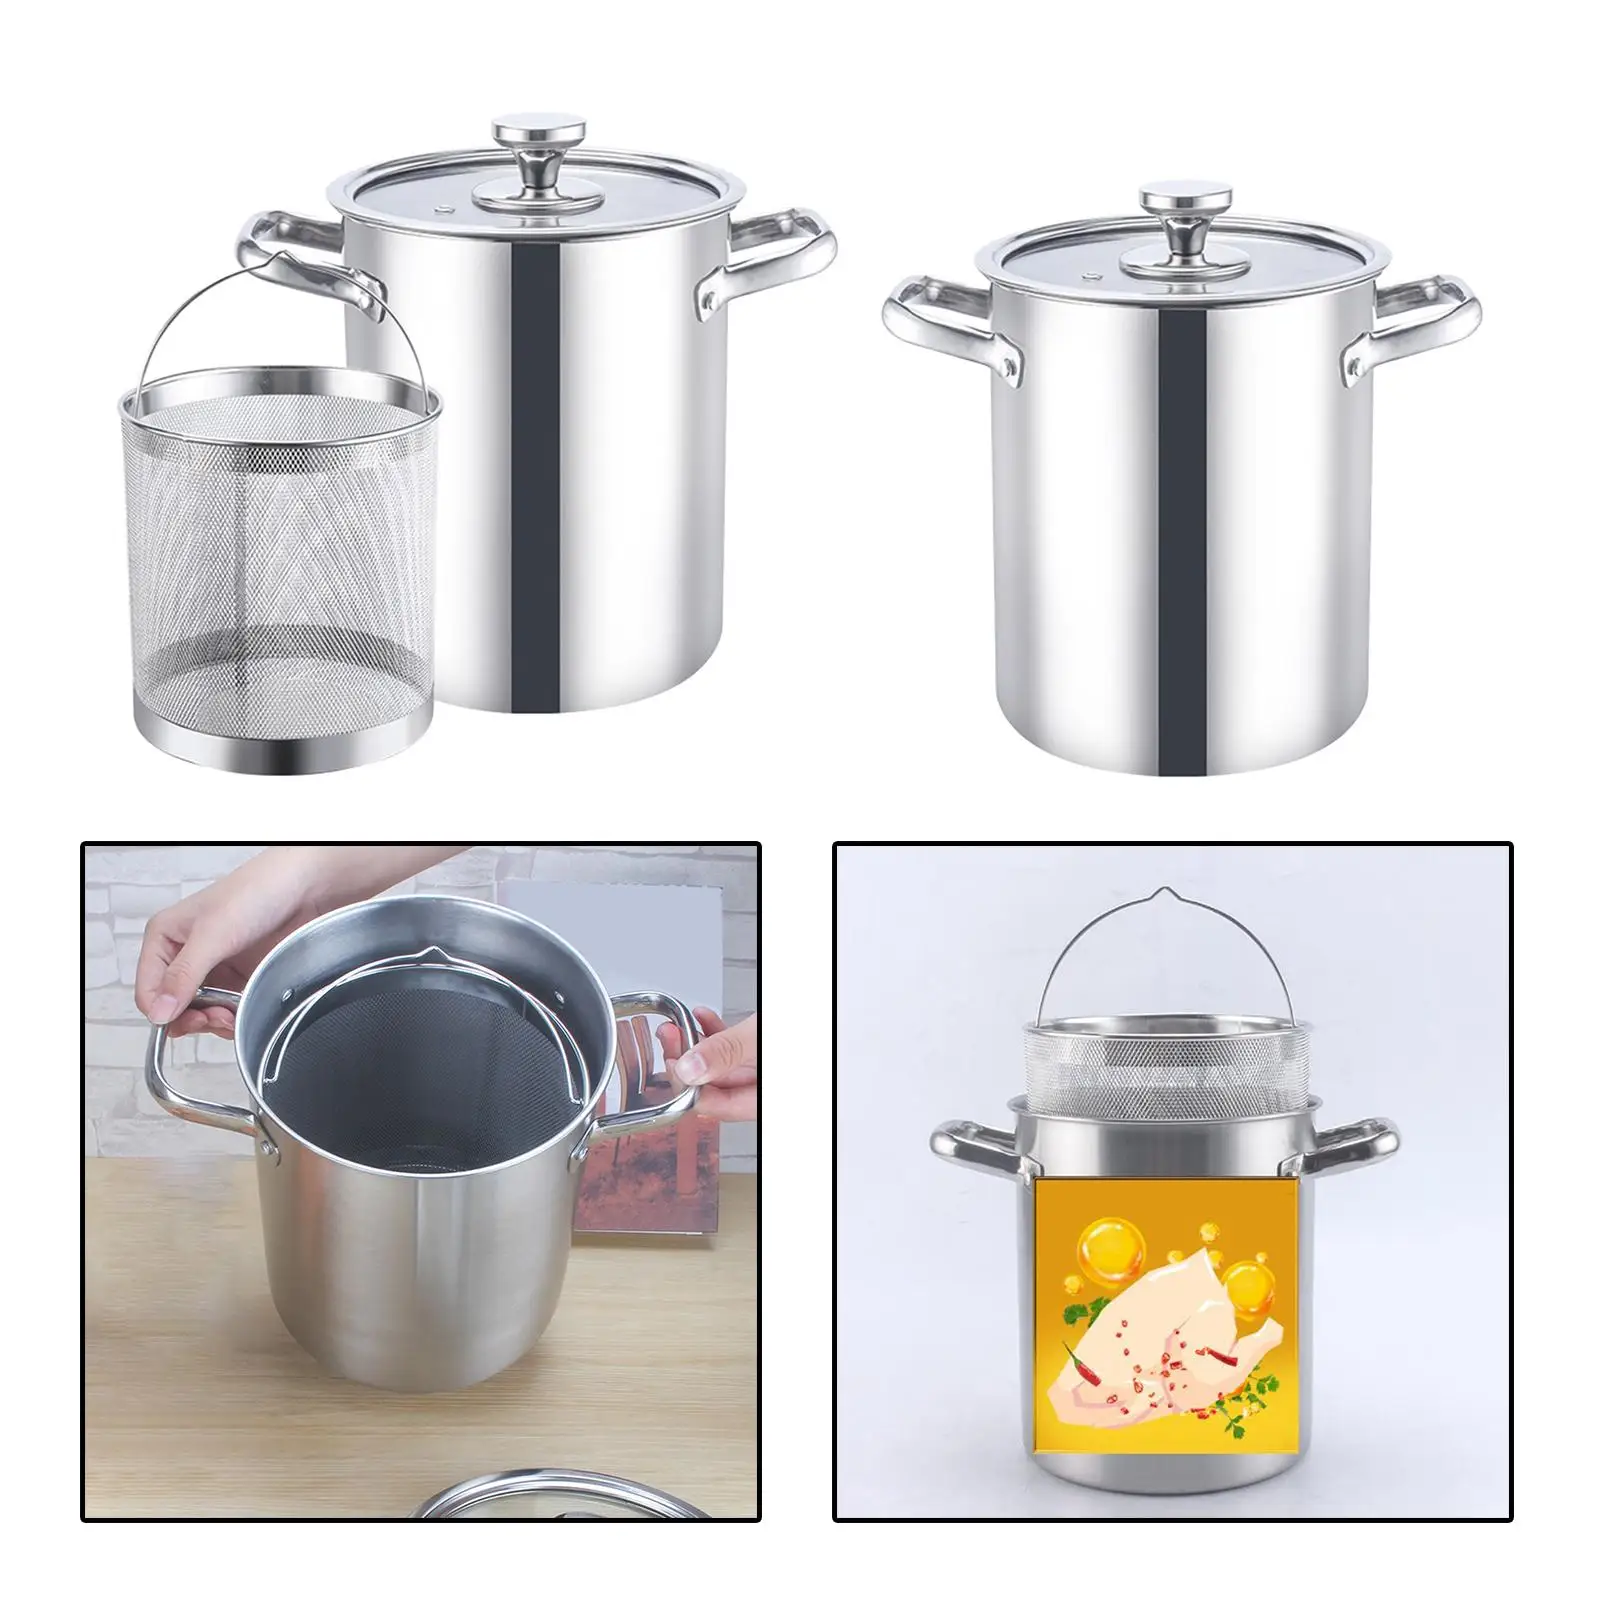 Stockpot with Lid, Kithen Cooking Pot, Stainless Steel Rice Bucket Large